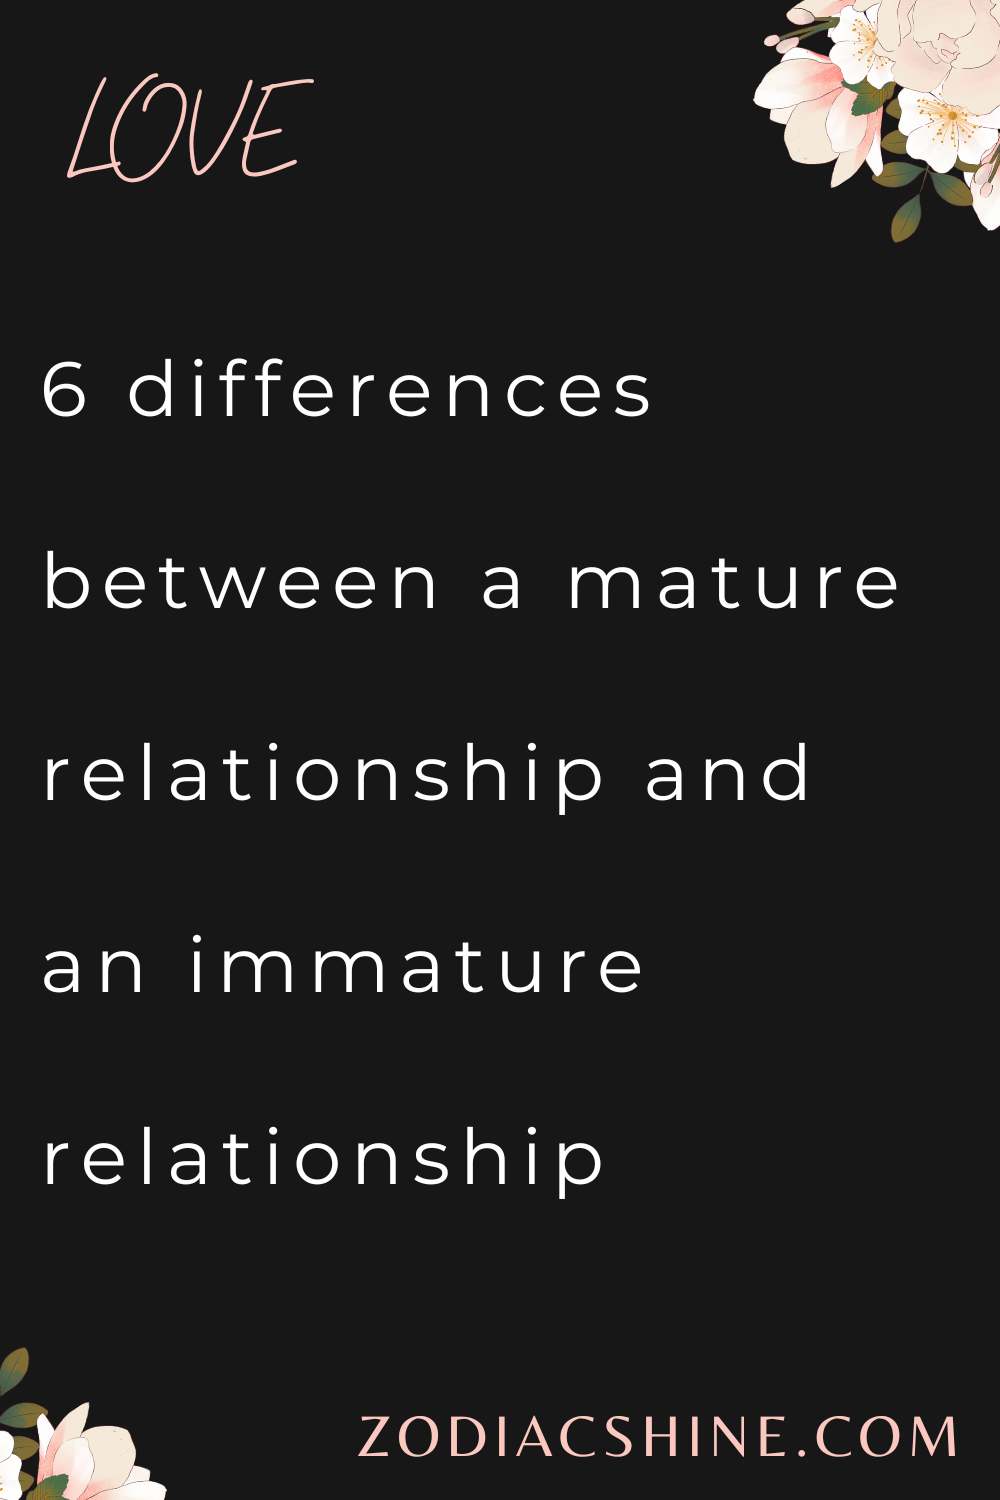 6 differences between a mature relationship and an immature relationship